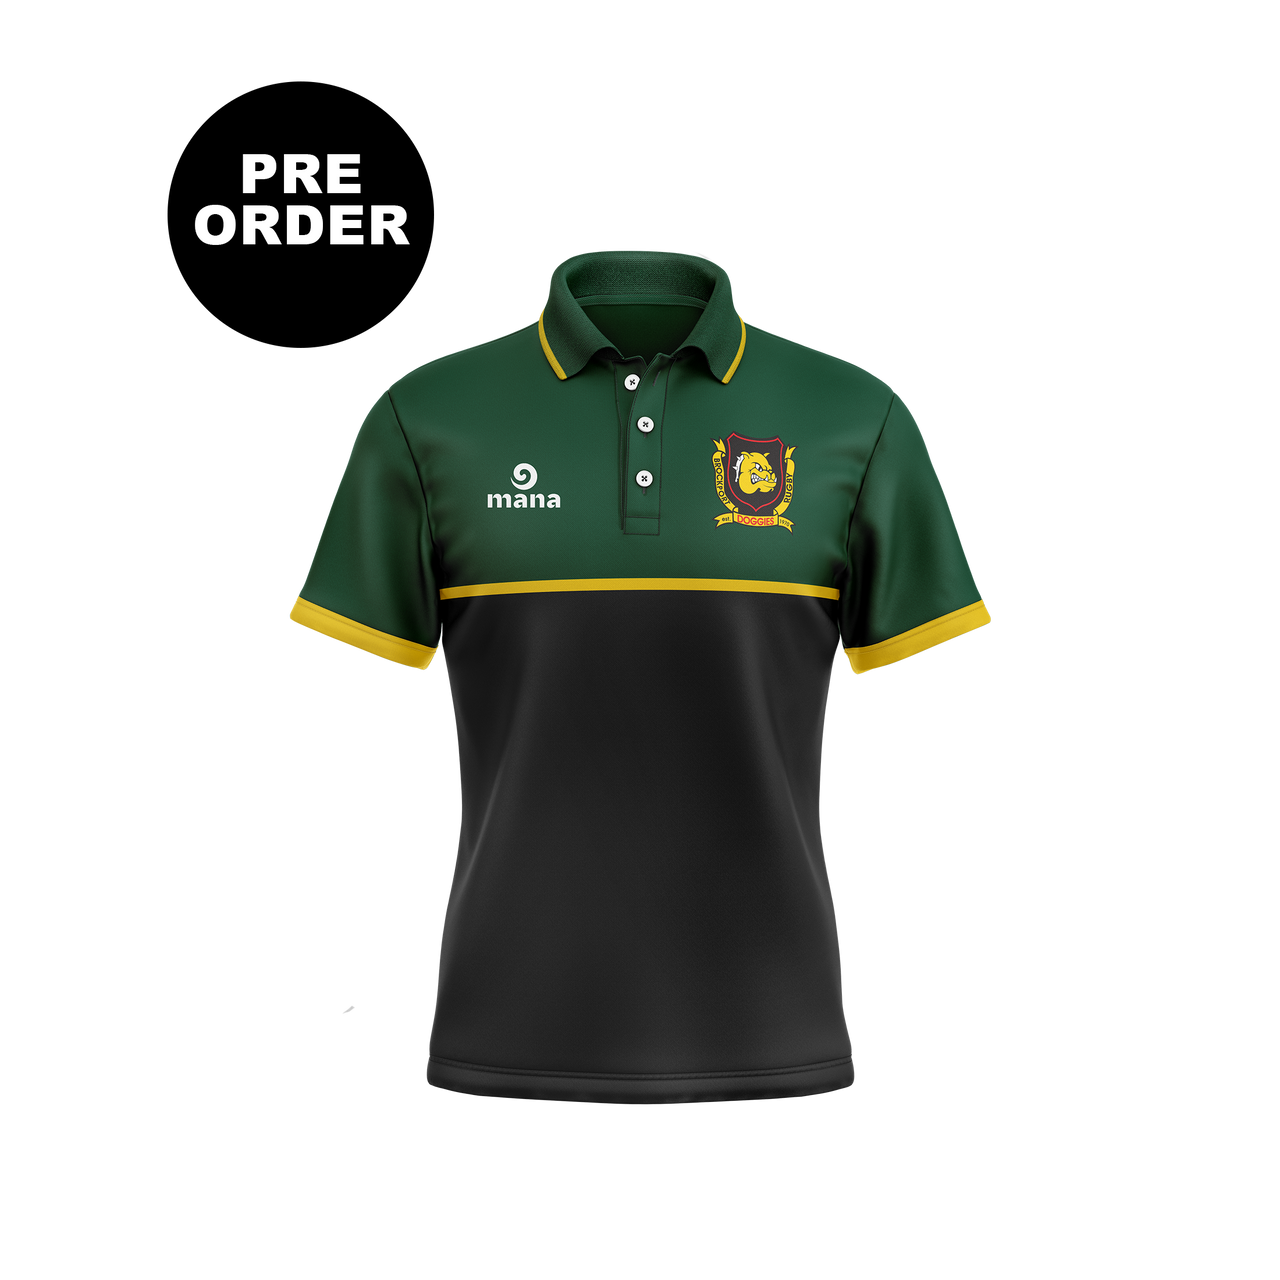 Brockport Rugby Men's Polo Shirt